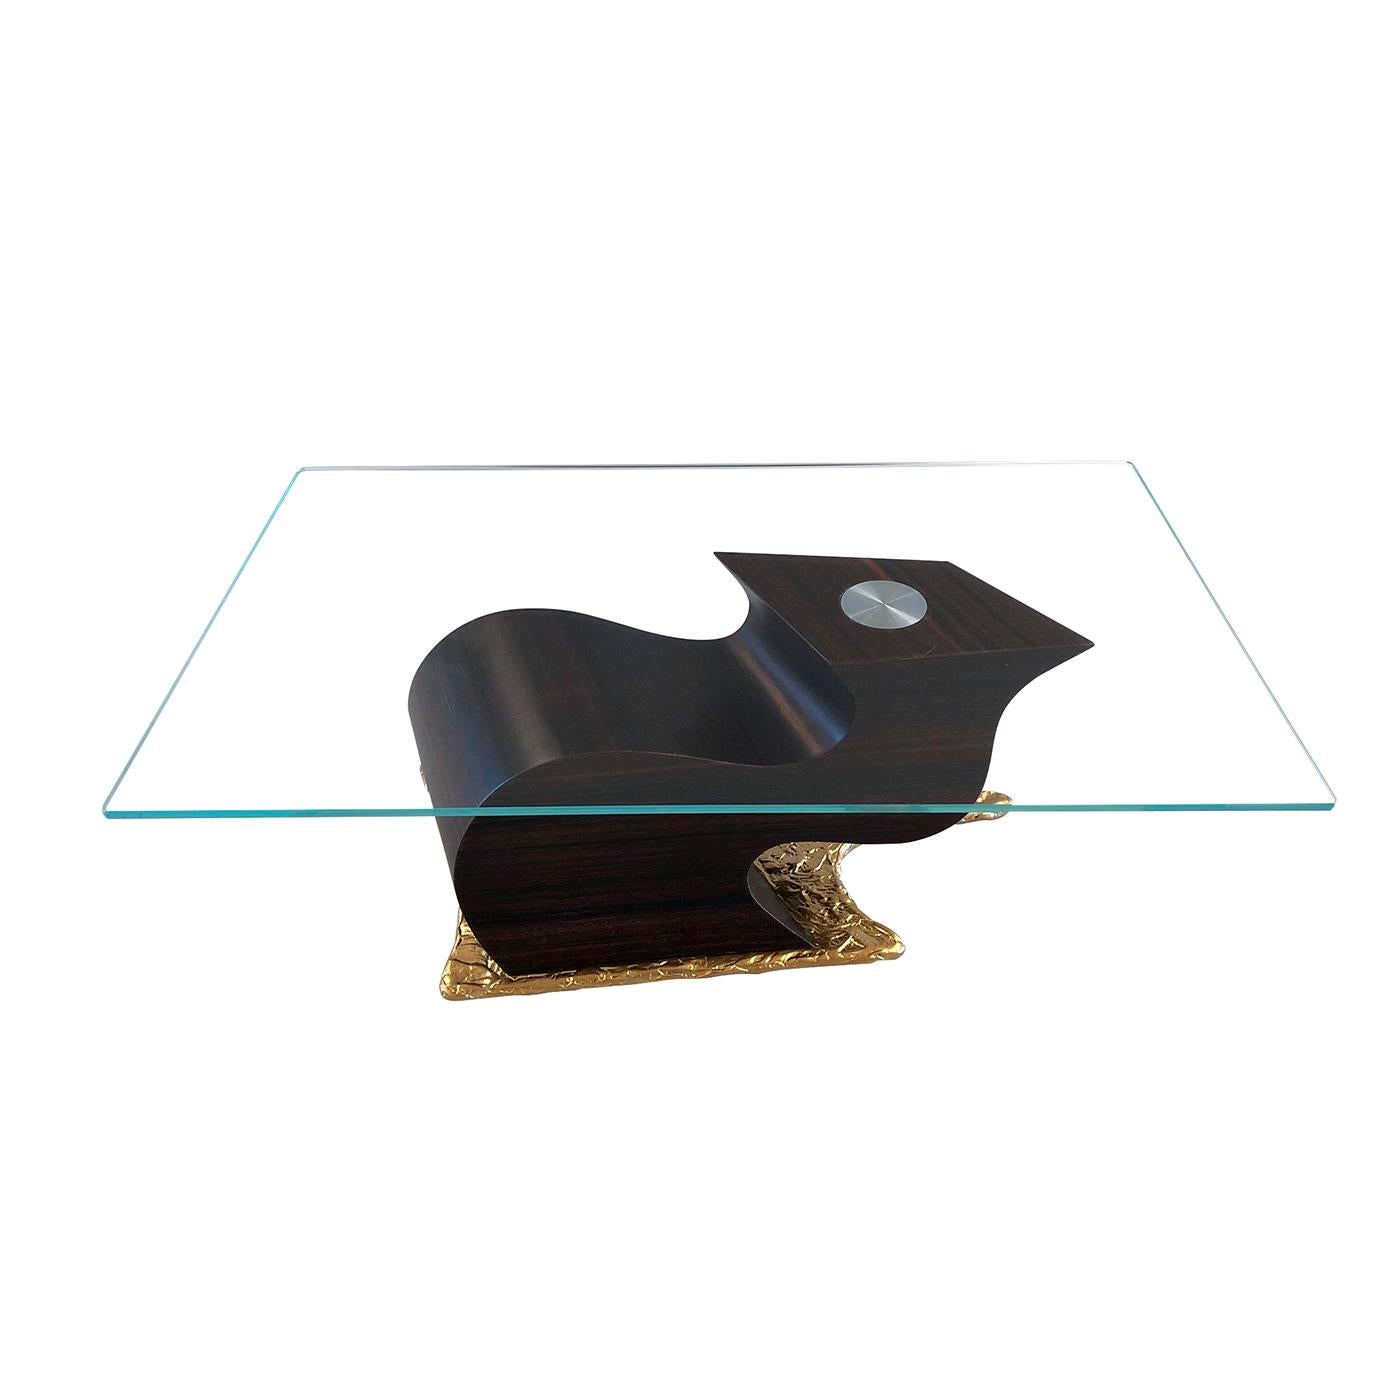 A daring combination of materials and finishes characterizes this dining table brimming with exceptional sculptural charm. The extra-clear tempered glass tops rest on a sinuous structure veneered in prized ebony, which in turn lays on a shaped,